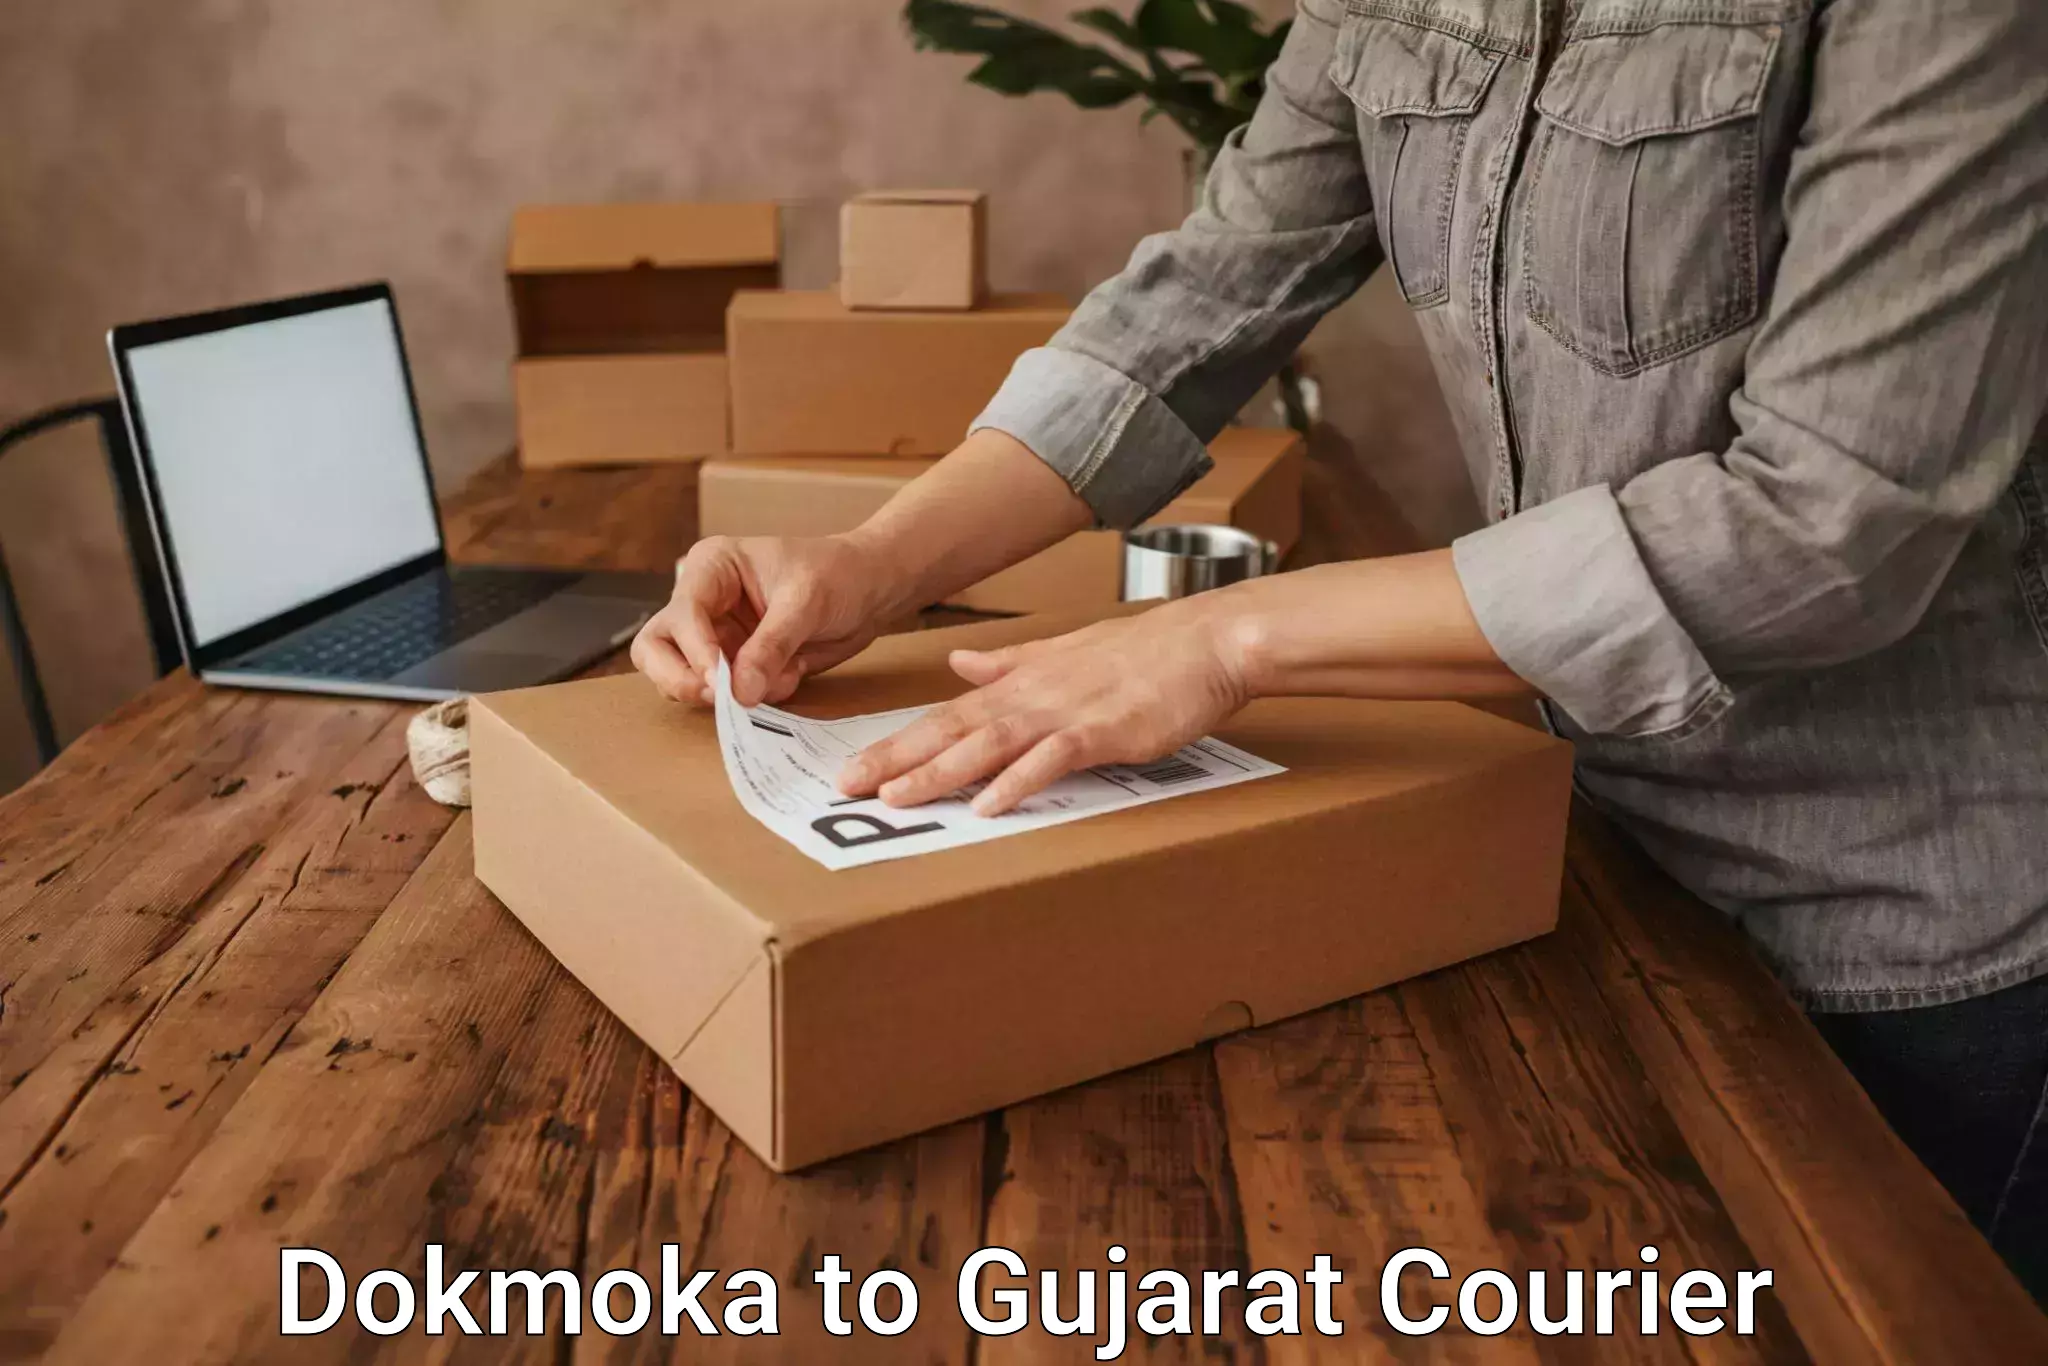 Courier service booking in Dokmoka to Gujarat